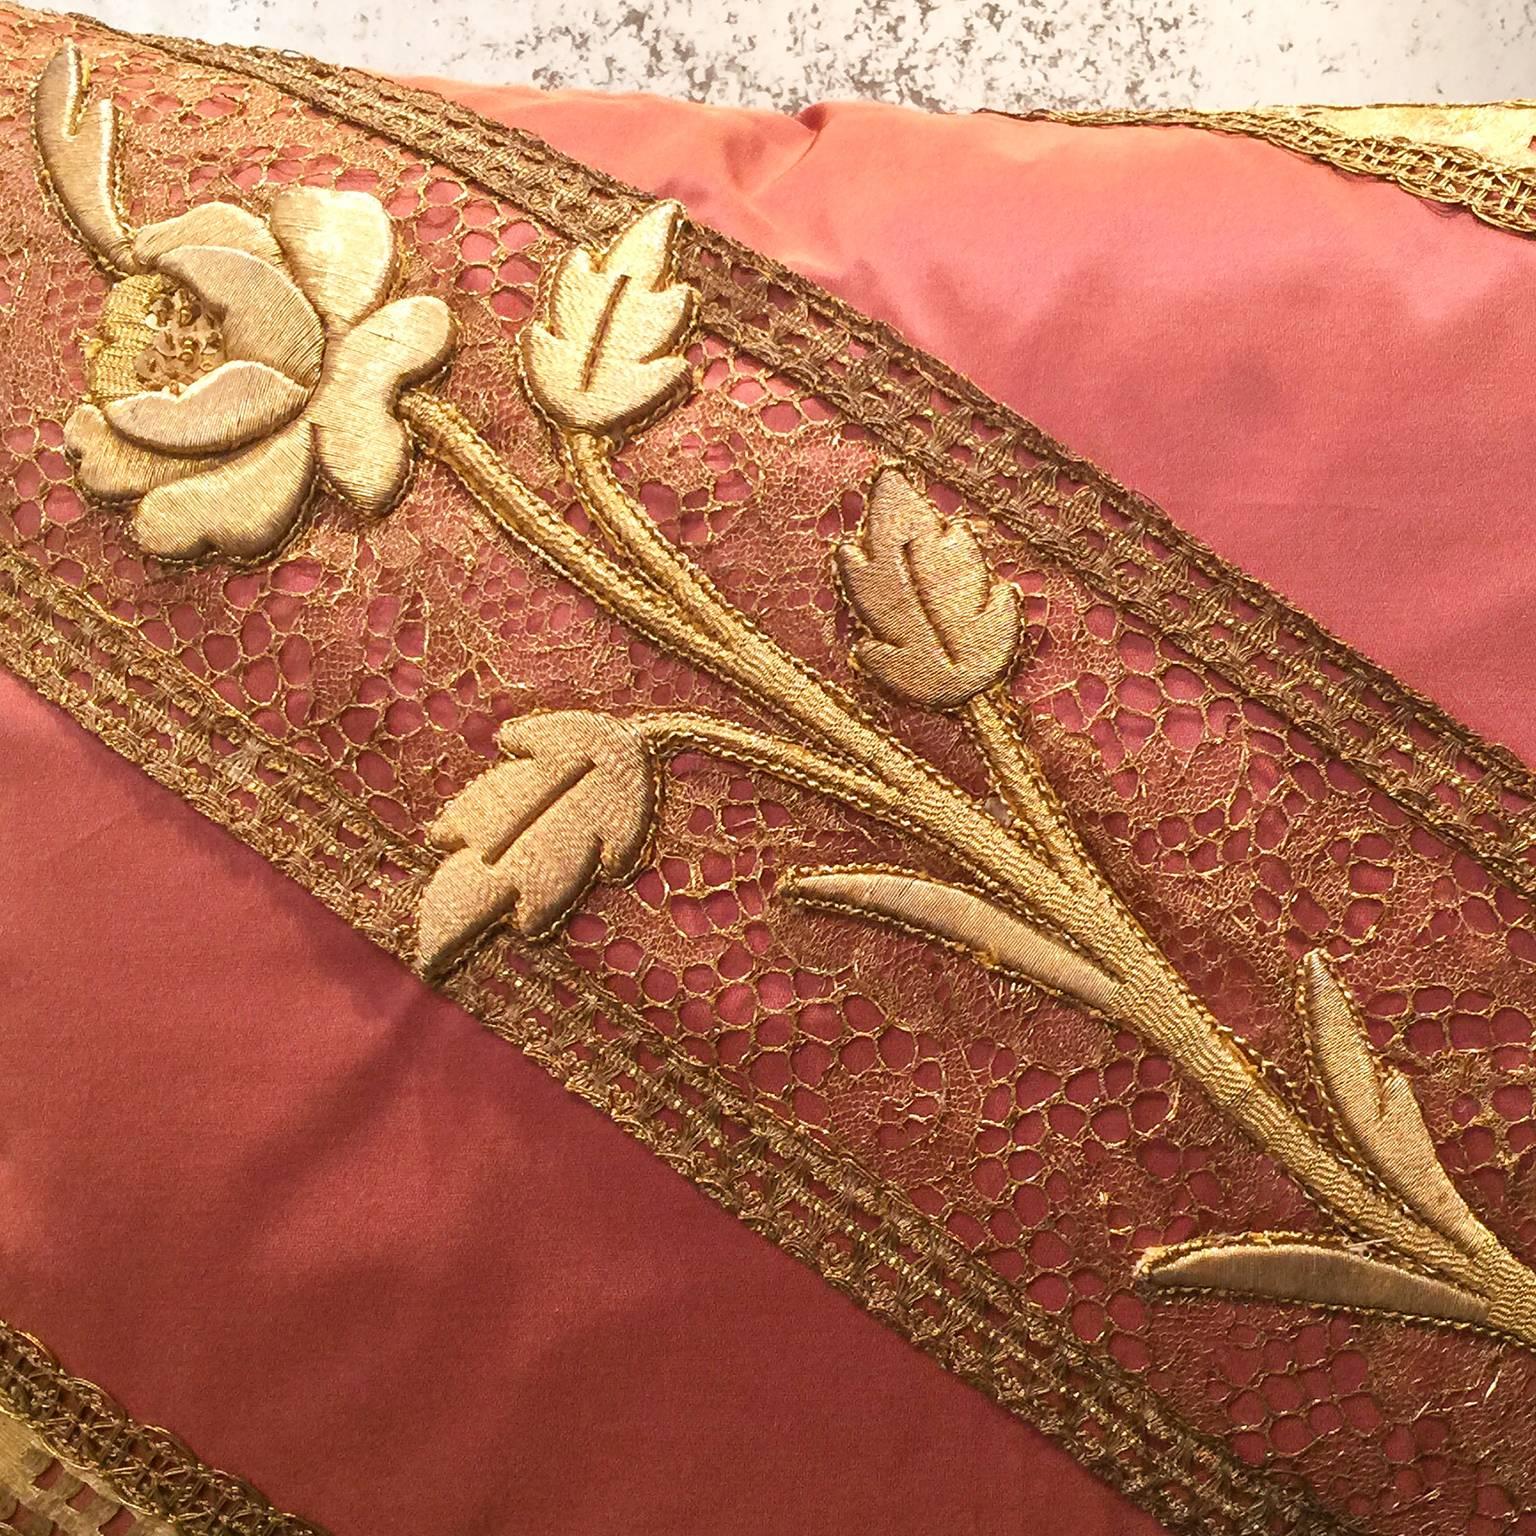 The diagonal decoration is composed by layering of a rare 19th century. French handmade gold lace bordered by 18th century. Italian gold metallic trim with an applique of raised gold metallic embroidery of a rose, stem, and leaves. The composition